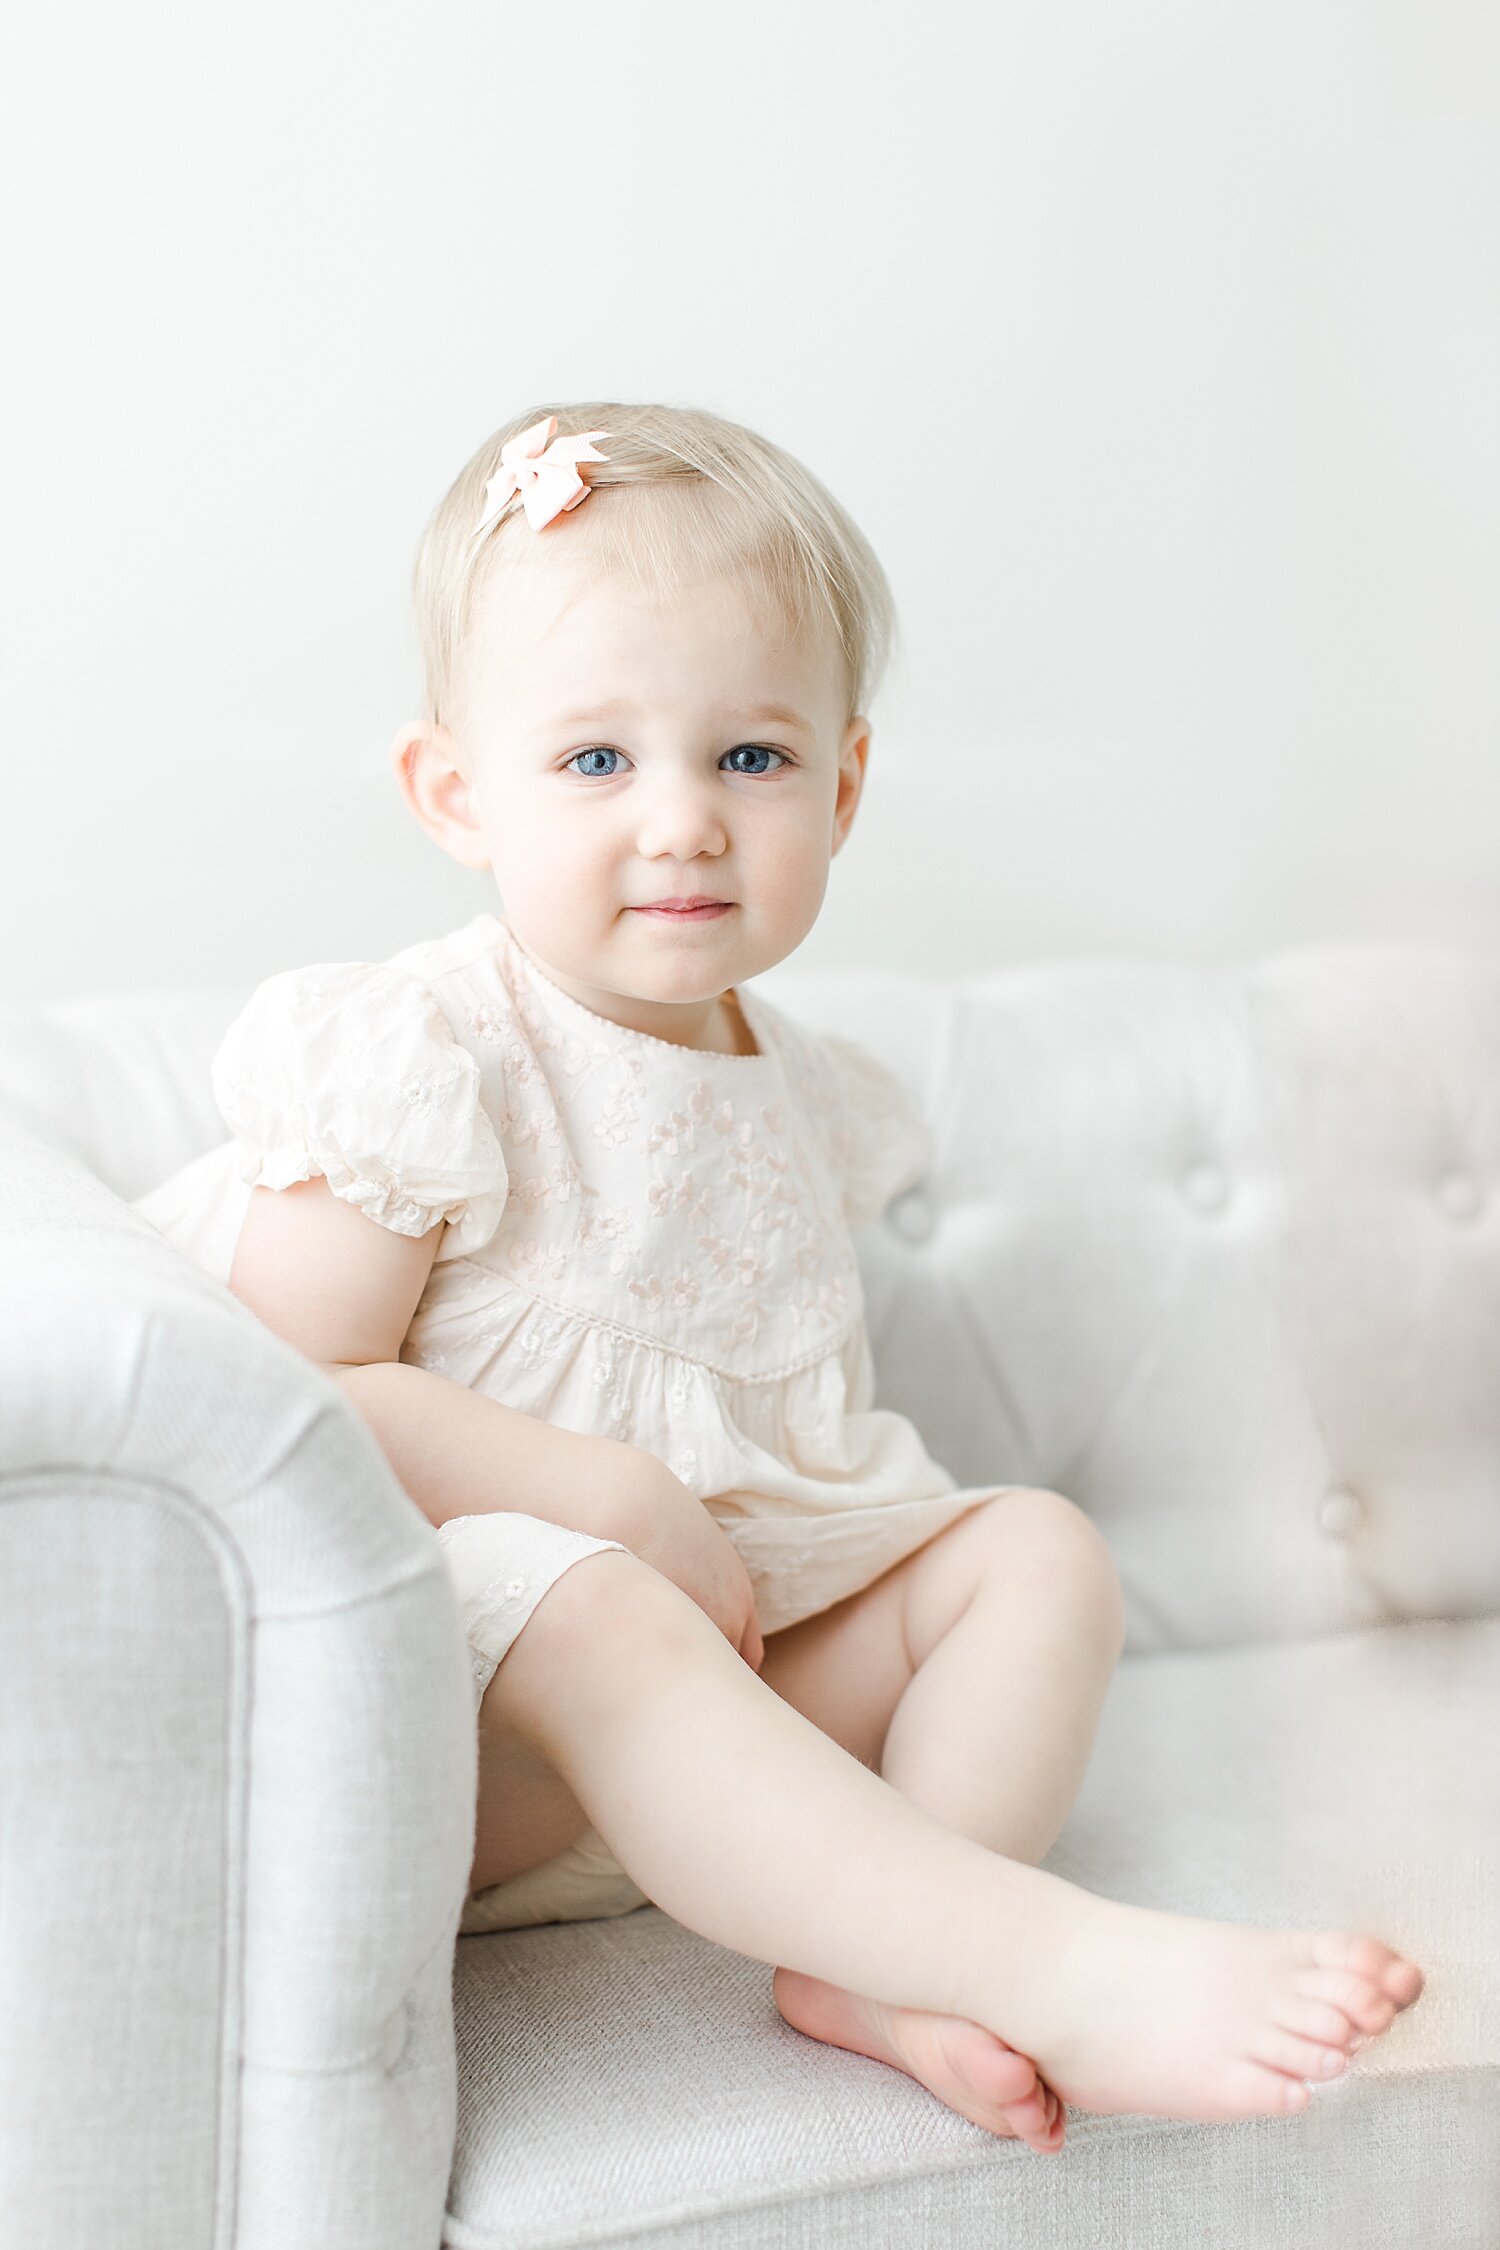 18 month old little girl sitting on a couch for photos with Kristin Wood Photography.